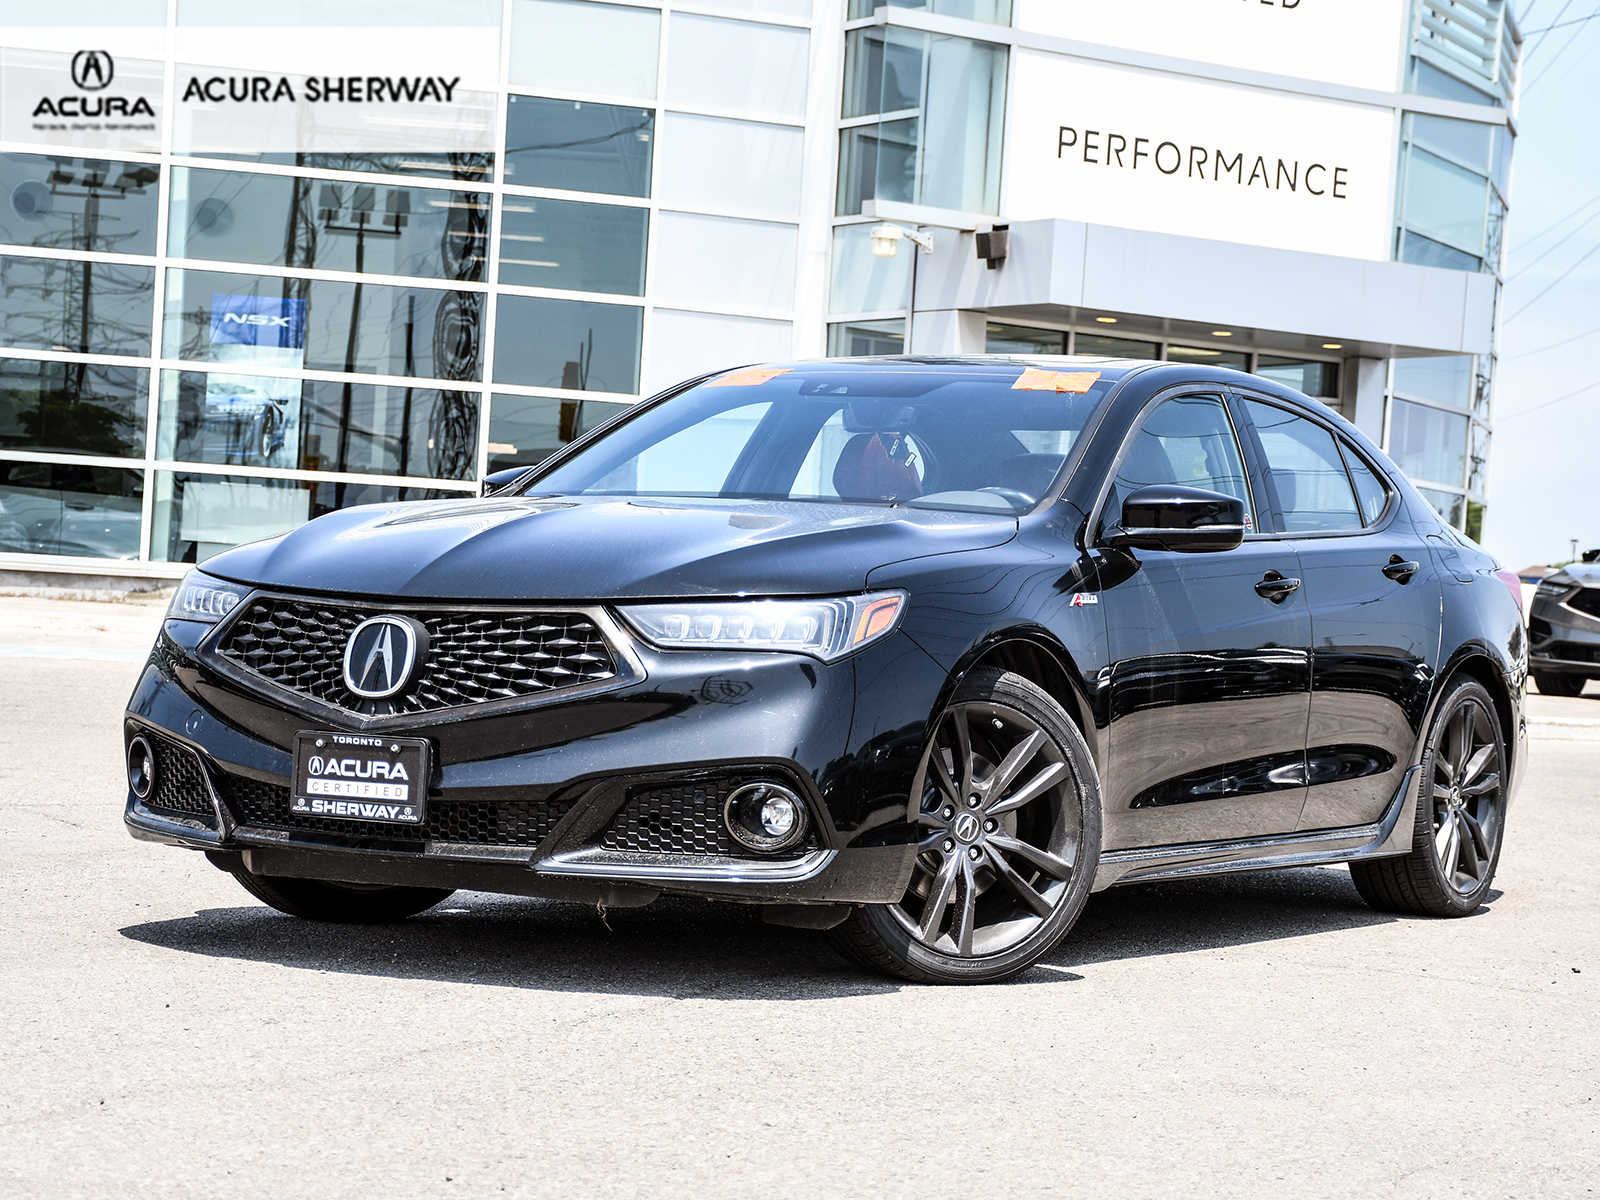 2020 Acura TLX A-Spec - Acura Certified